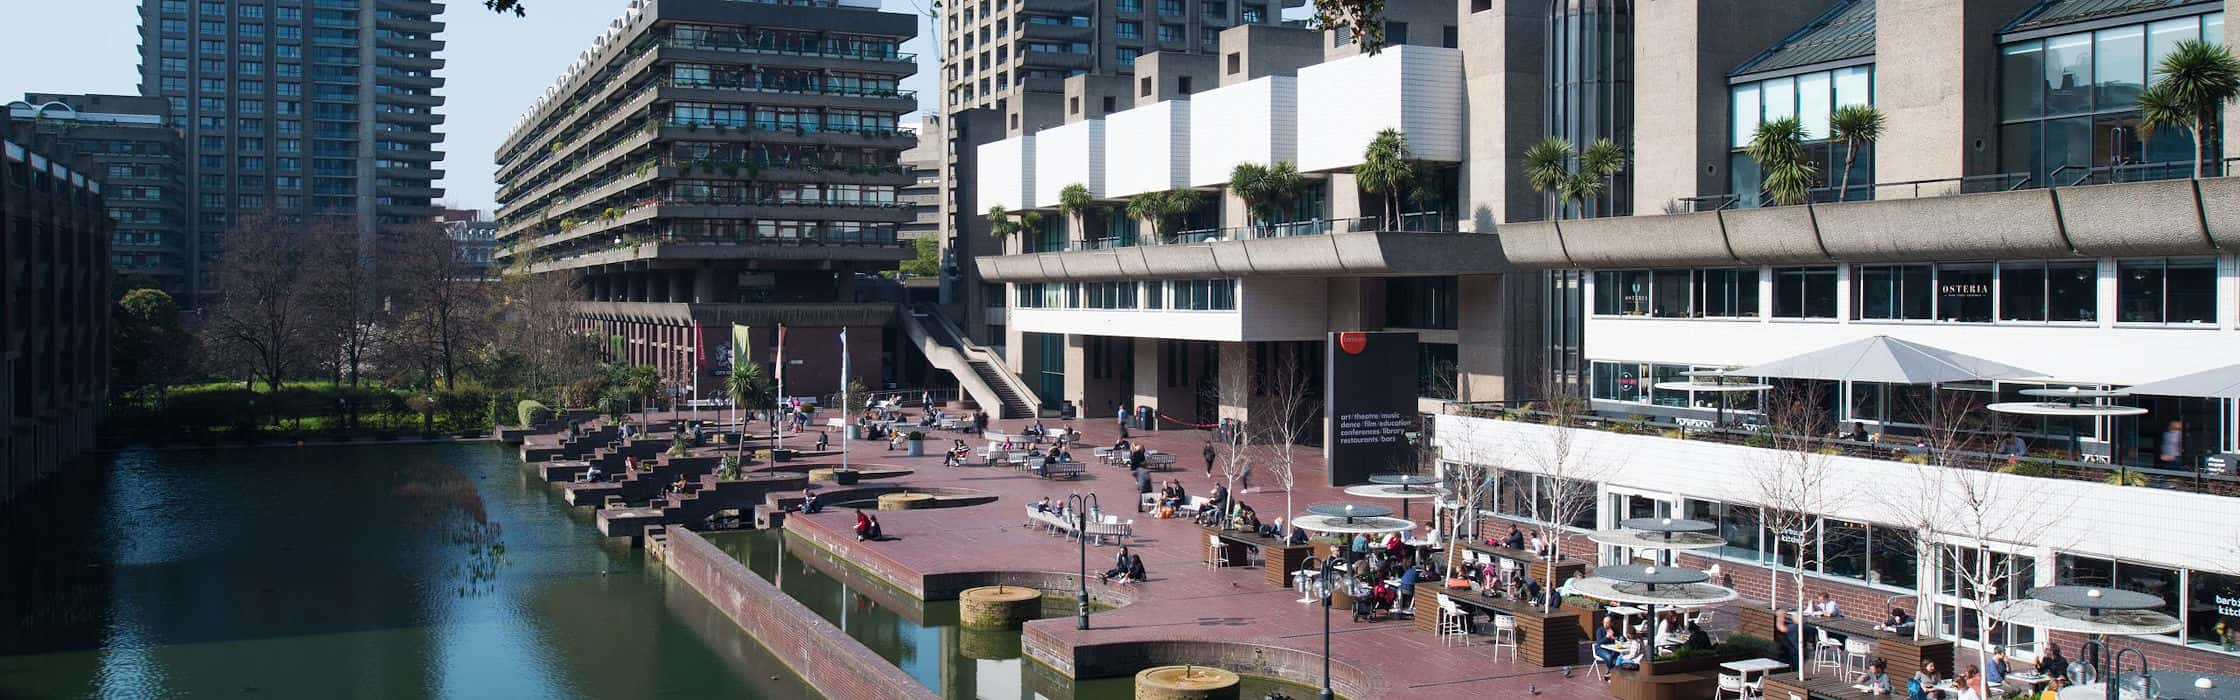 What's On at The Barbican Centre, London